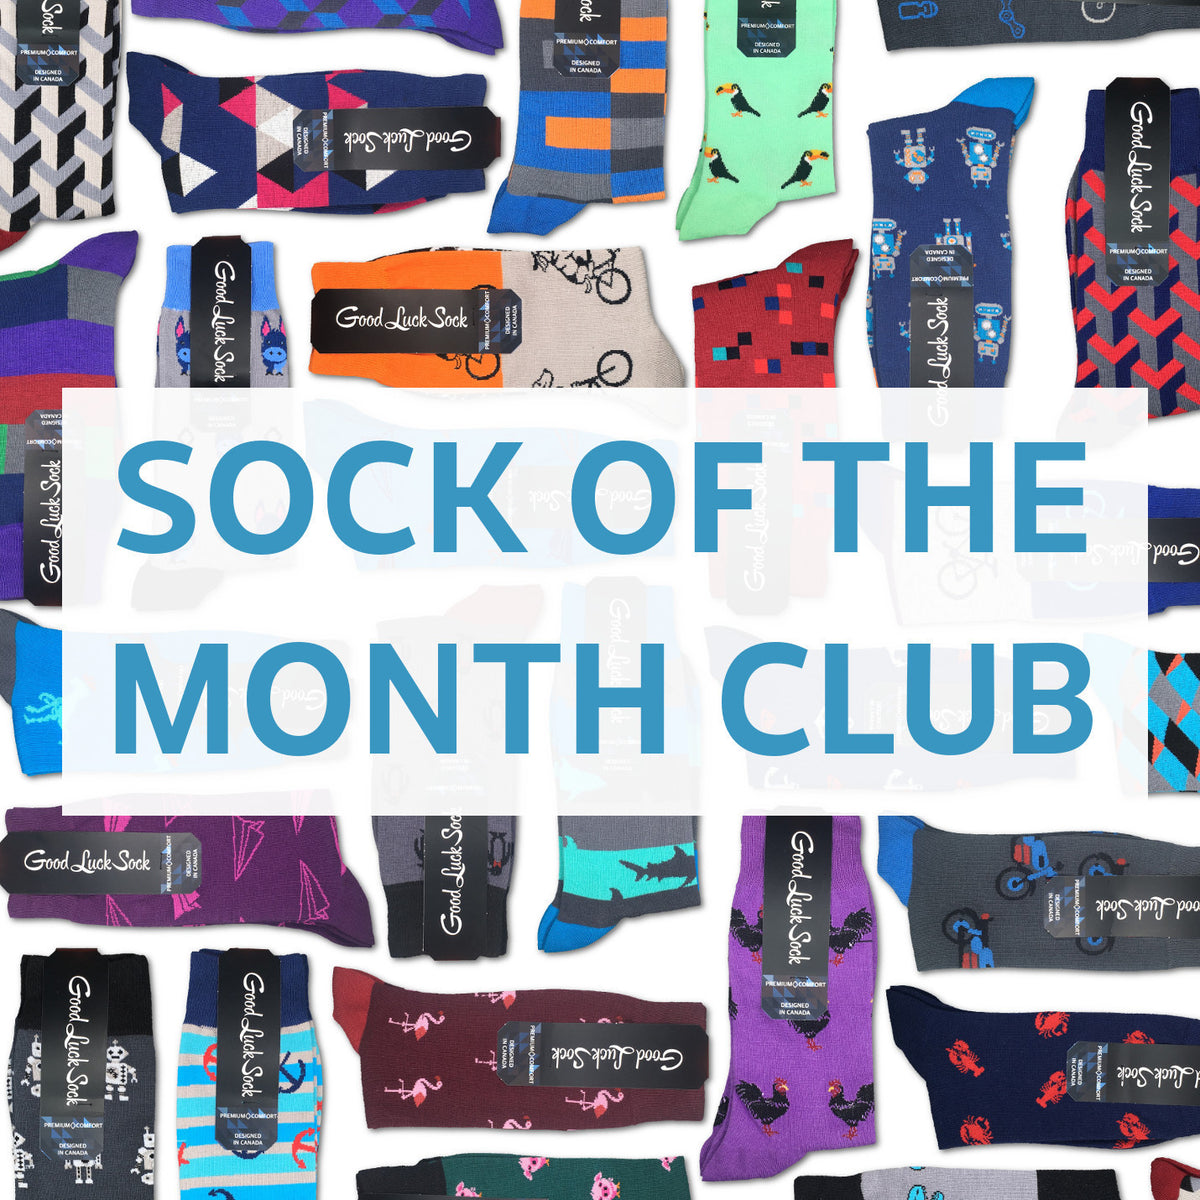 Actualizar 95+ imagen sock of the month club